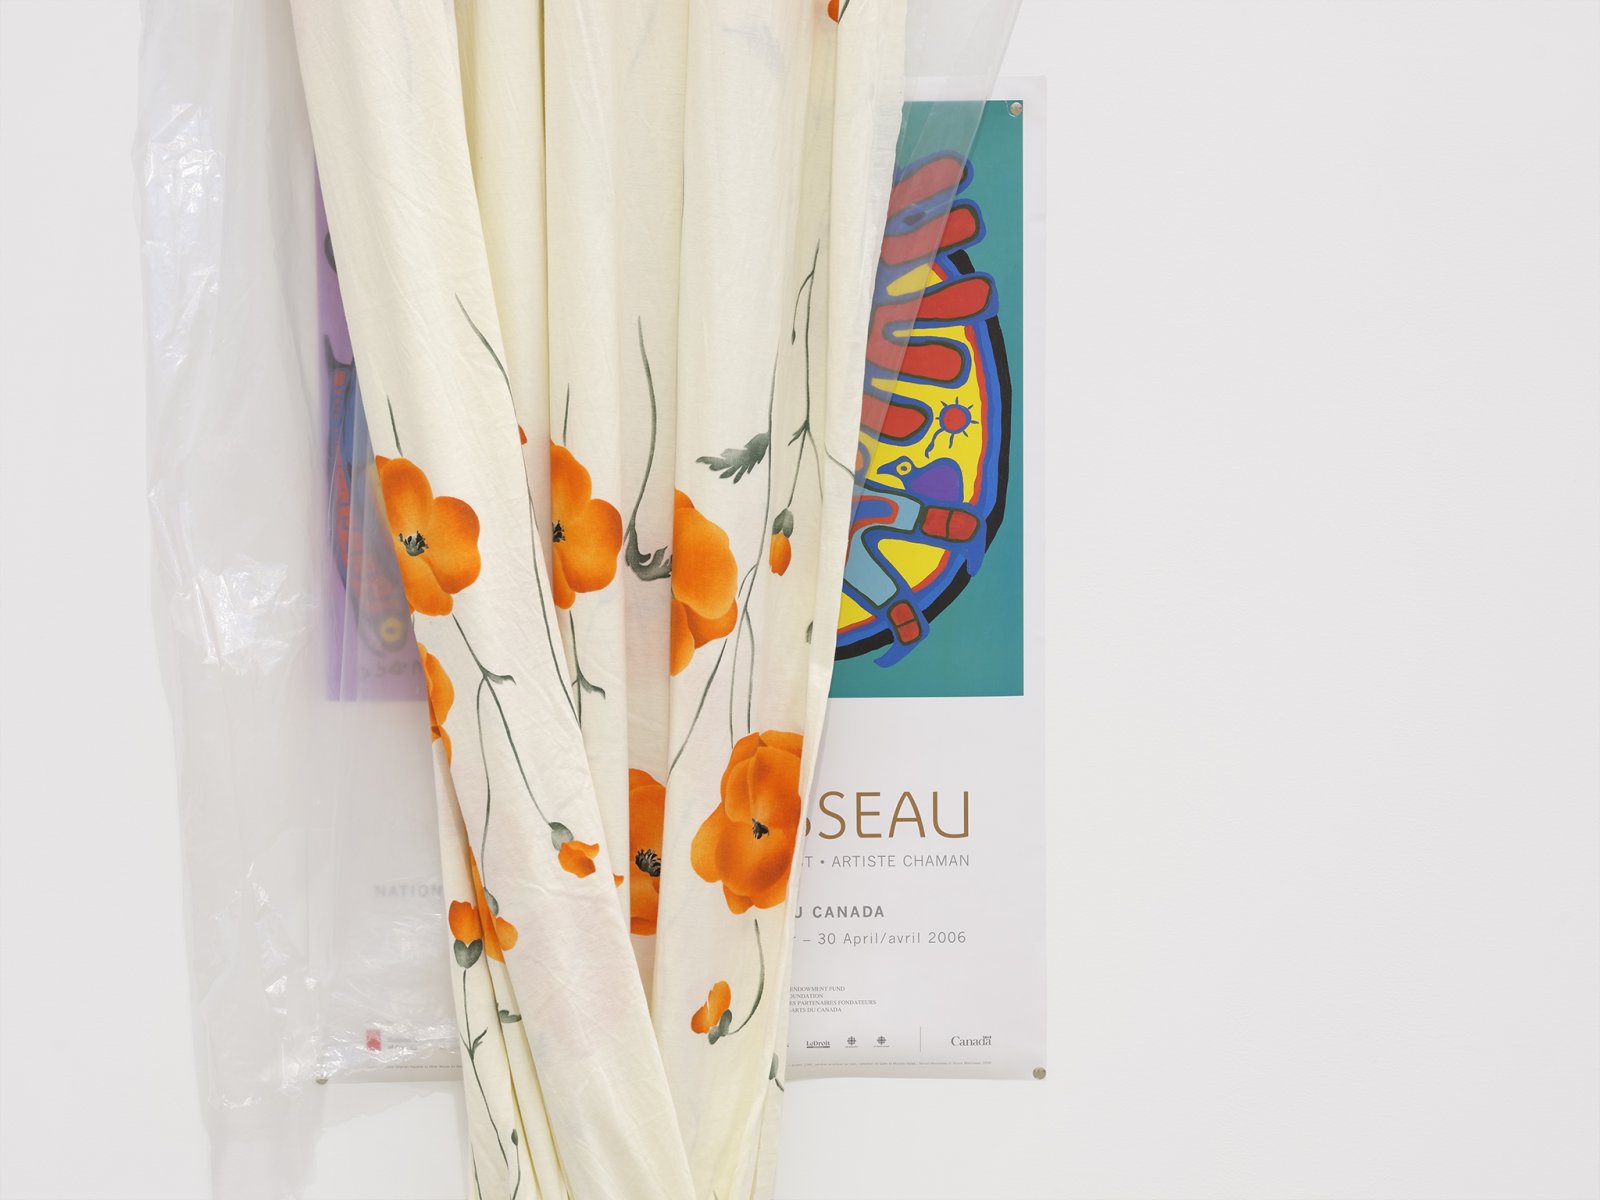 Duane Linklater, body (detail), 2016, plastic sheeting, cotton cloth, nails, thumb tacks, paper poster from National Gallery of Canada, 124 x 35 x 15 in. (315 x 89 x 38 cm)